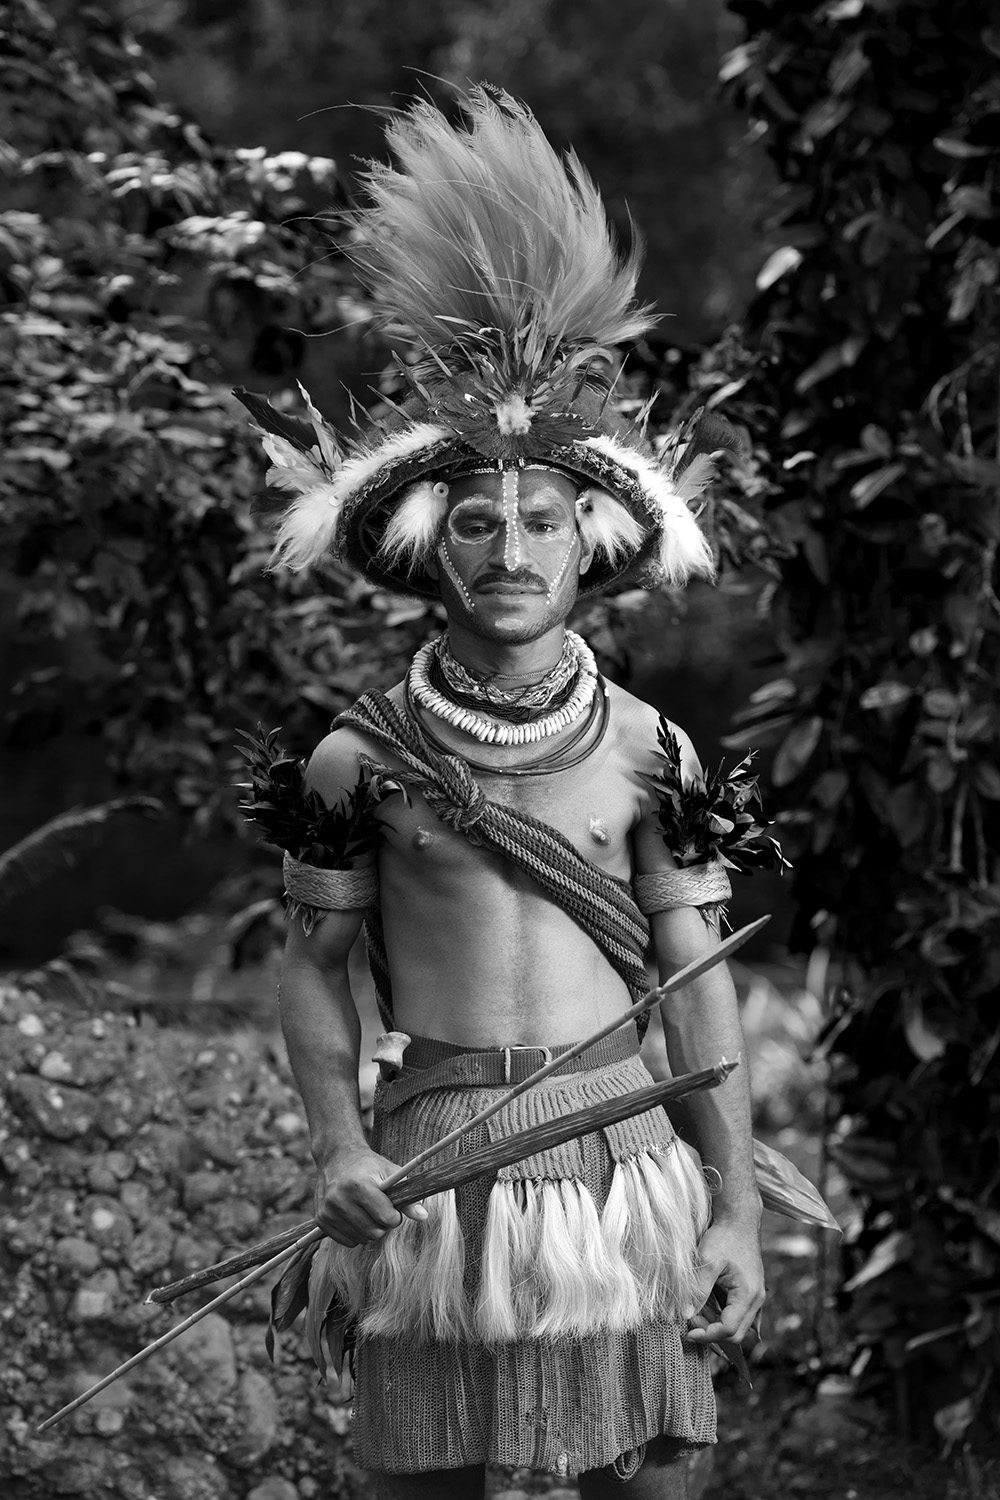 image of AARONTAIT COPYRIGHTED 2014 272 PNG PAPUA NEW GUNIEA DOCUMENTARY PHOTOGRAPHER BLACK WHITE PORTRAIT TRIBAL TRADITIONAL TRAVEL PHOTOGRAPHER MAN